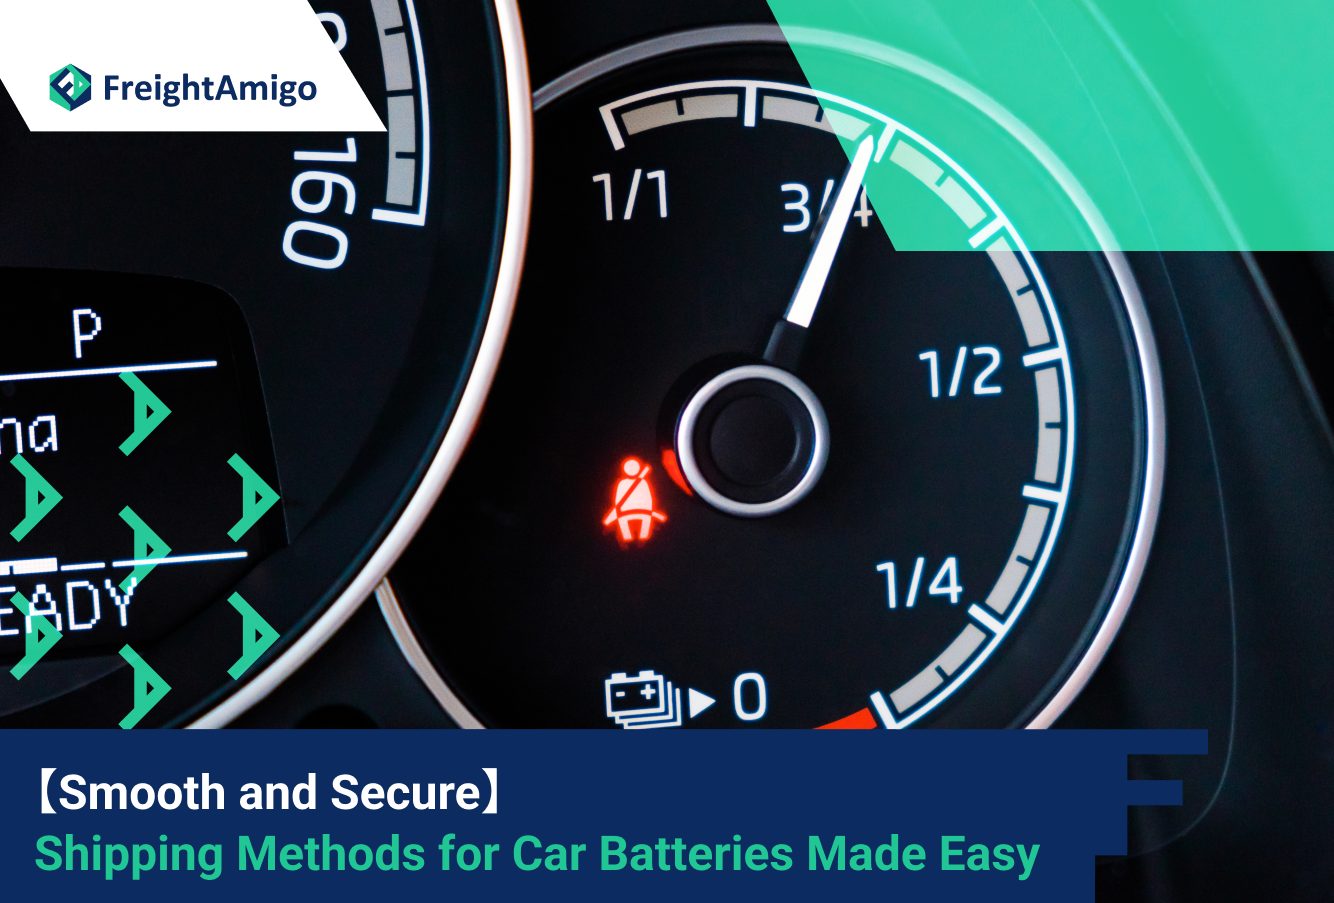 【Smooth and Secure】 Shipping Methods for Car Batteries